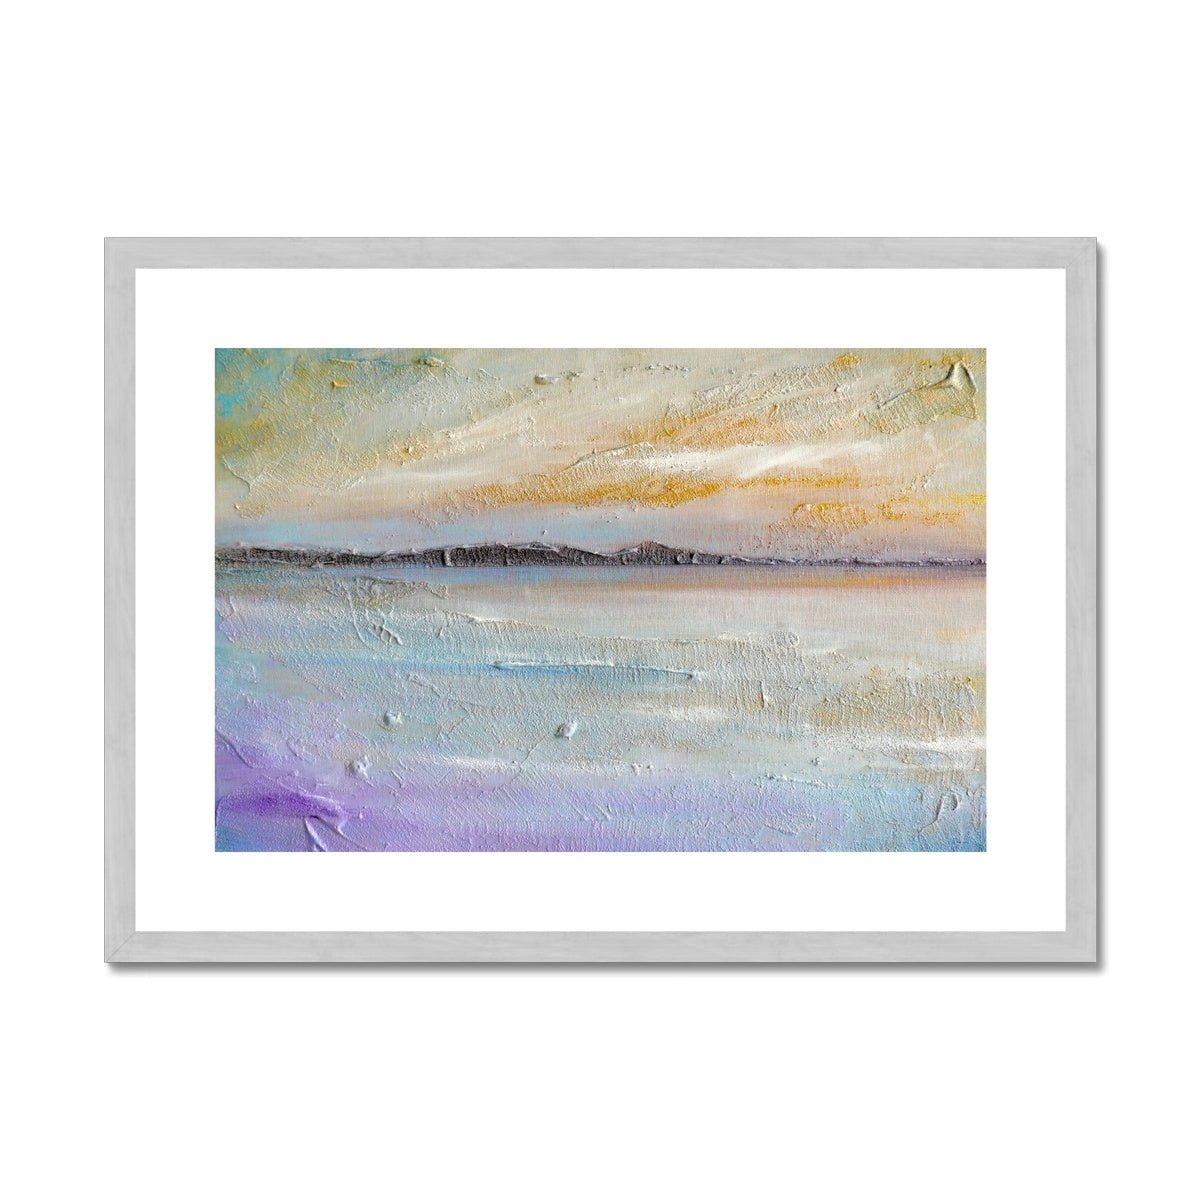 Sollas Beach North Uist Painting | Antique Framed & Mounted Prints From Scotland-Antique Framed & Mounted Prints-Hebridean Islands Art Gallery-A2 Landscape-Silver Frame-Paintings, Prints, Homeware, Art Gifts From Scotland By Scottish Artist Kevin Hunter